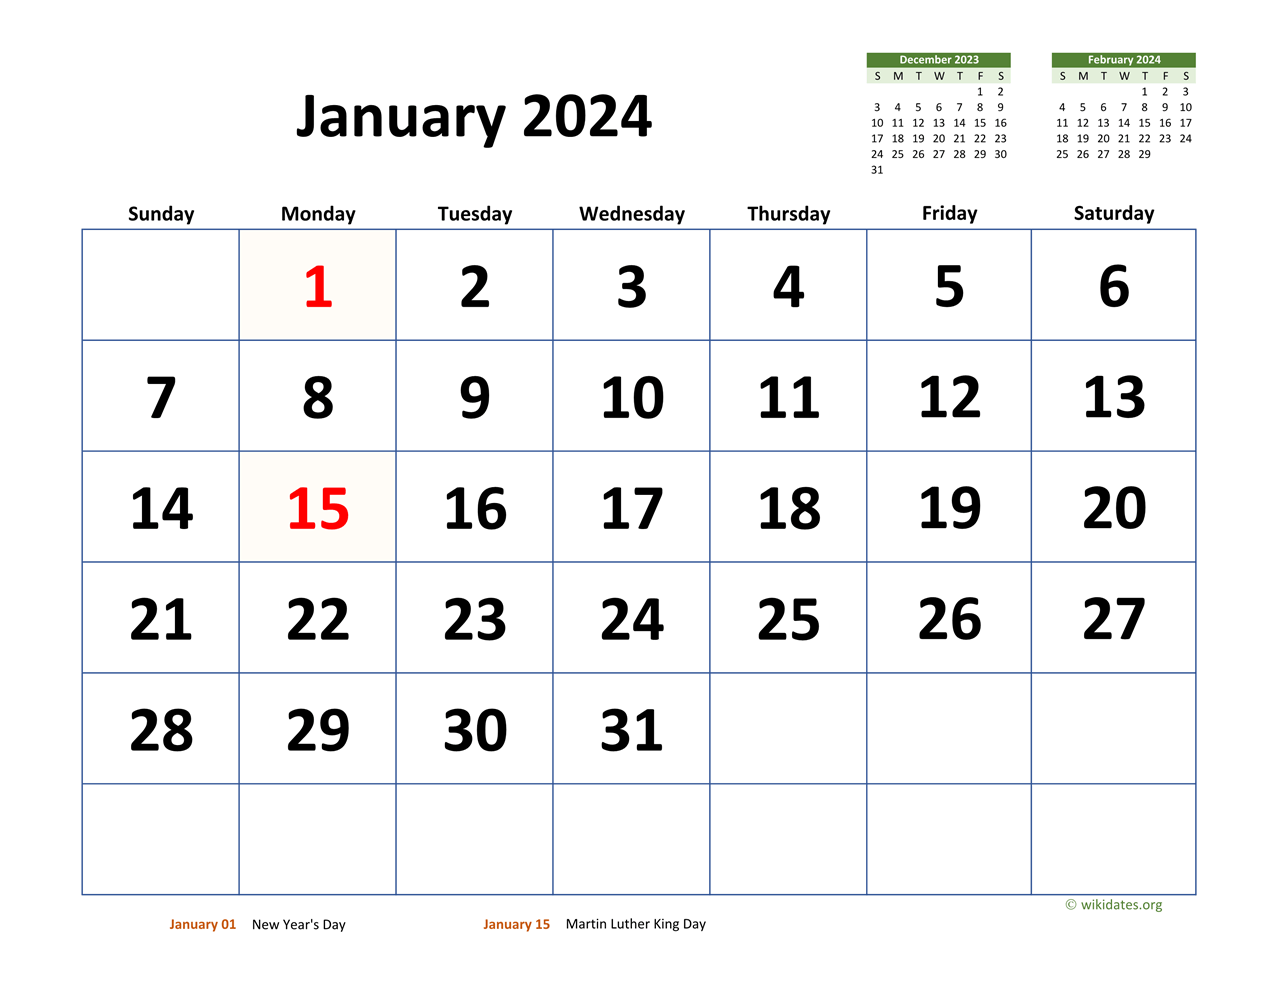 January 2024 Calendar with Extralarge Dates